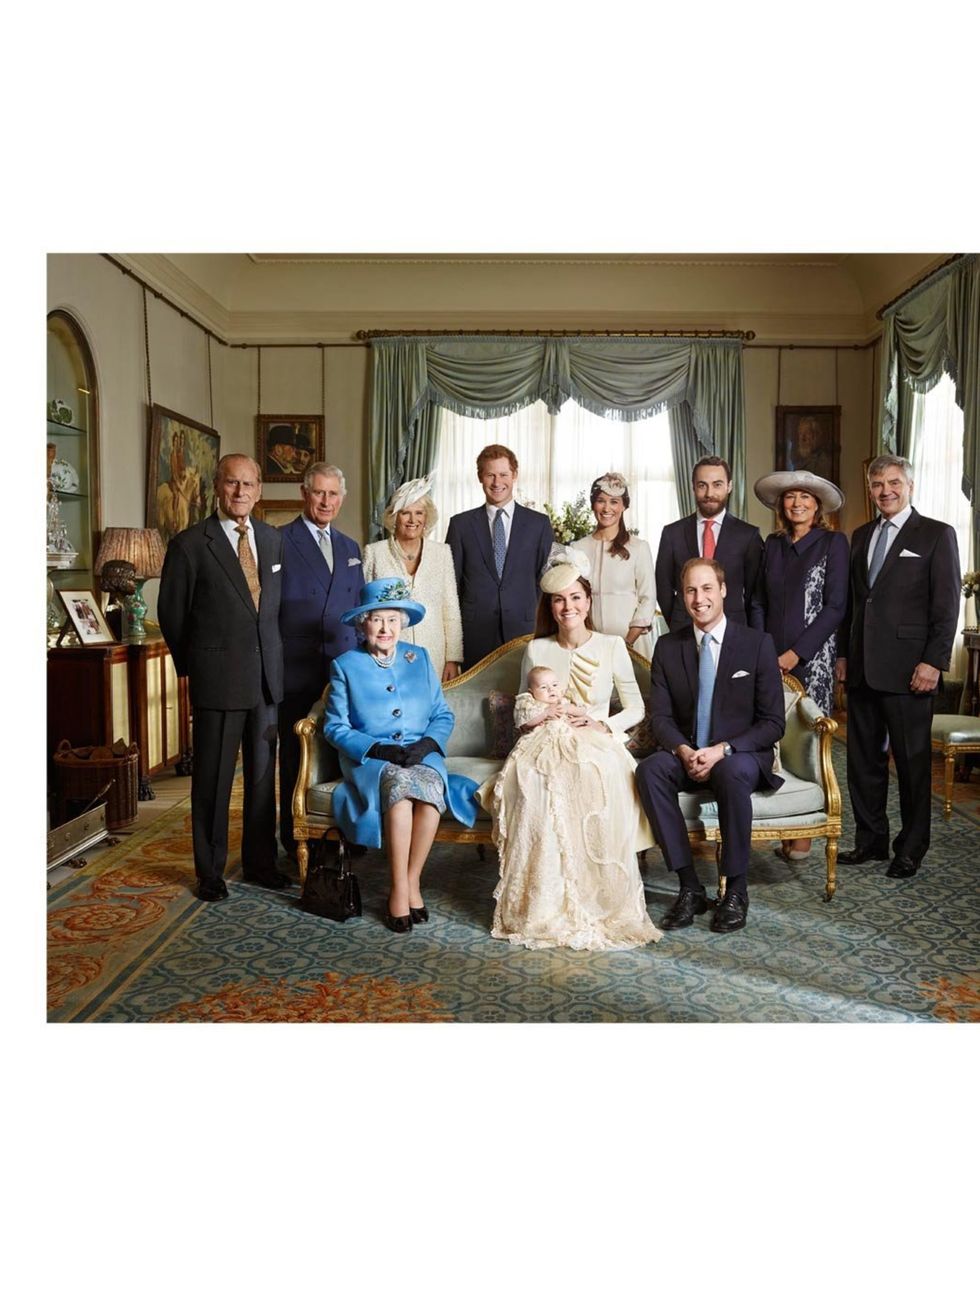 <p>The Royal family with Prince George wearing an outfit made of delicate Honiton lace and white satin by Angela Kelly, an exact replica of the one worn before him by every baby born to the British Royal family since 1841. The Duchess is wearing Alexander